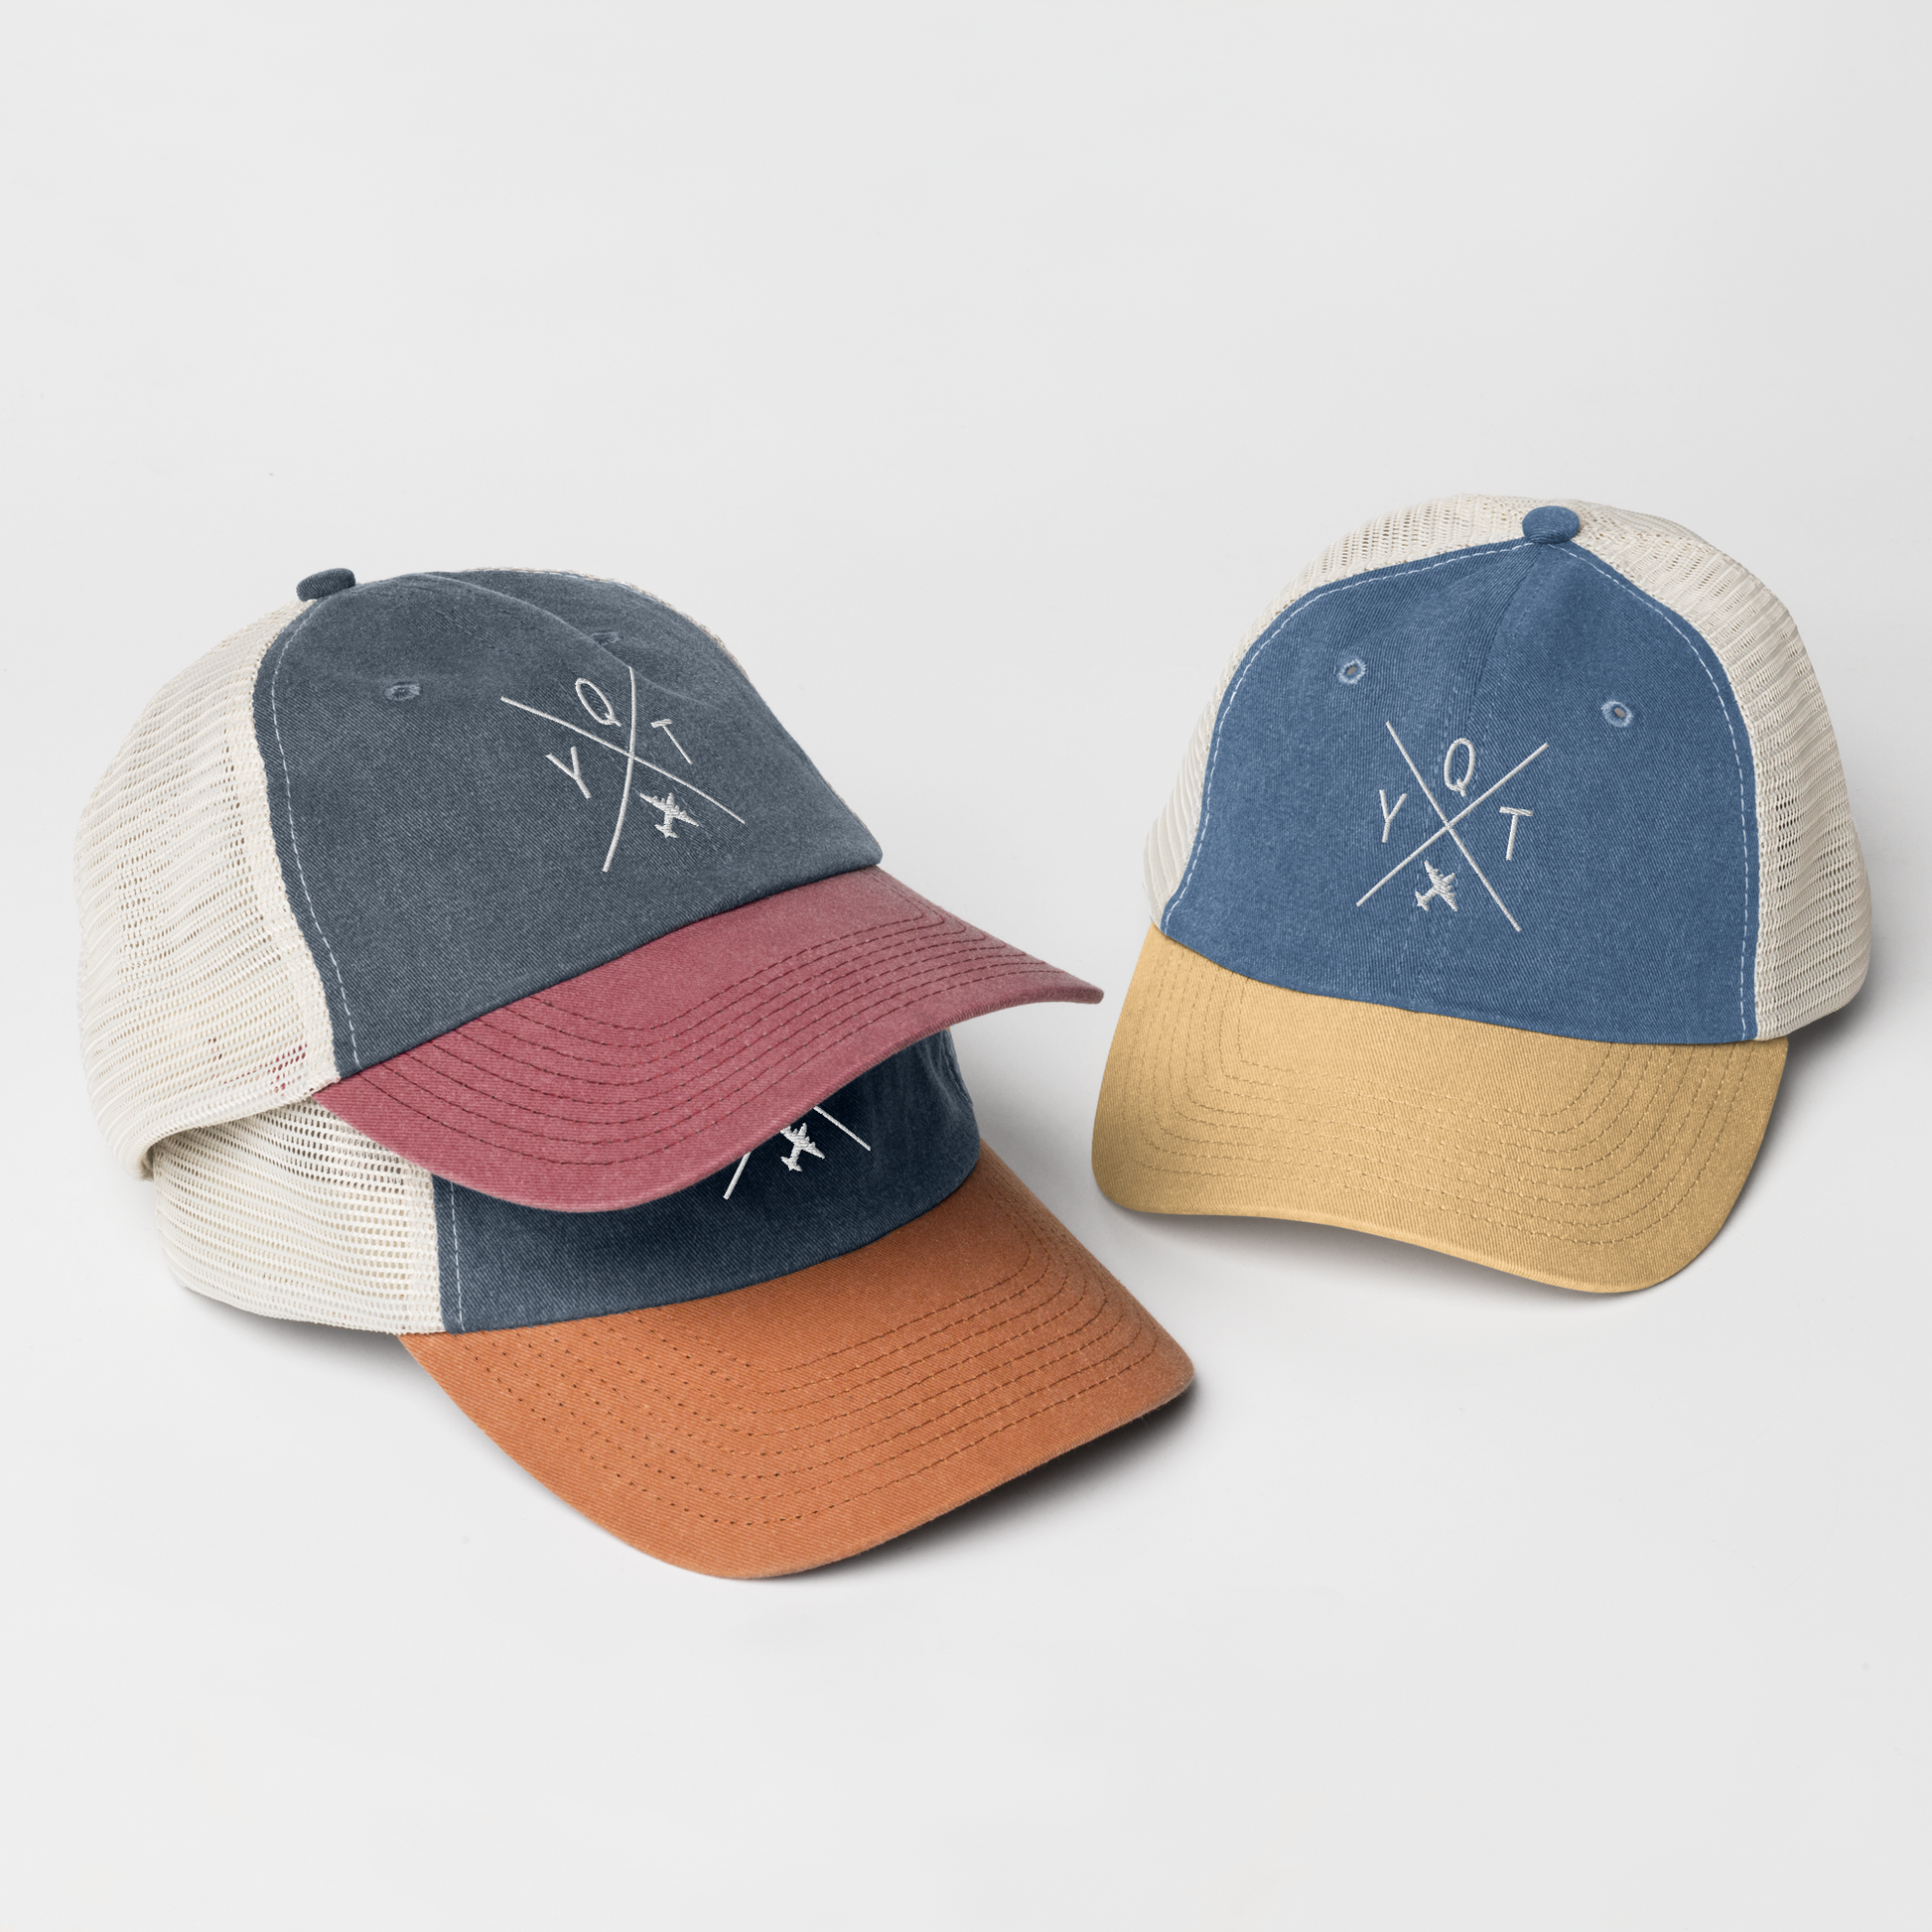 YHM Designs - YQT Thunder Bay Pigment-Dyed Trucker Cap - Crossed-X Design with Airport Code and Vintage Propliner - White Embroidery - Image 05